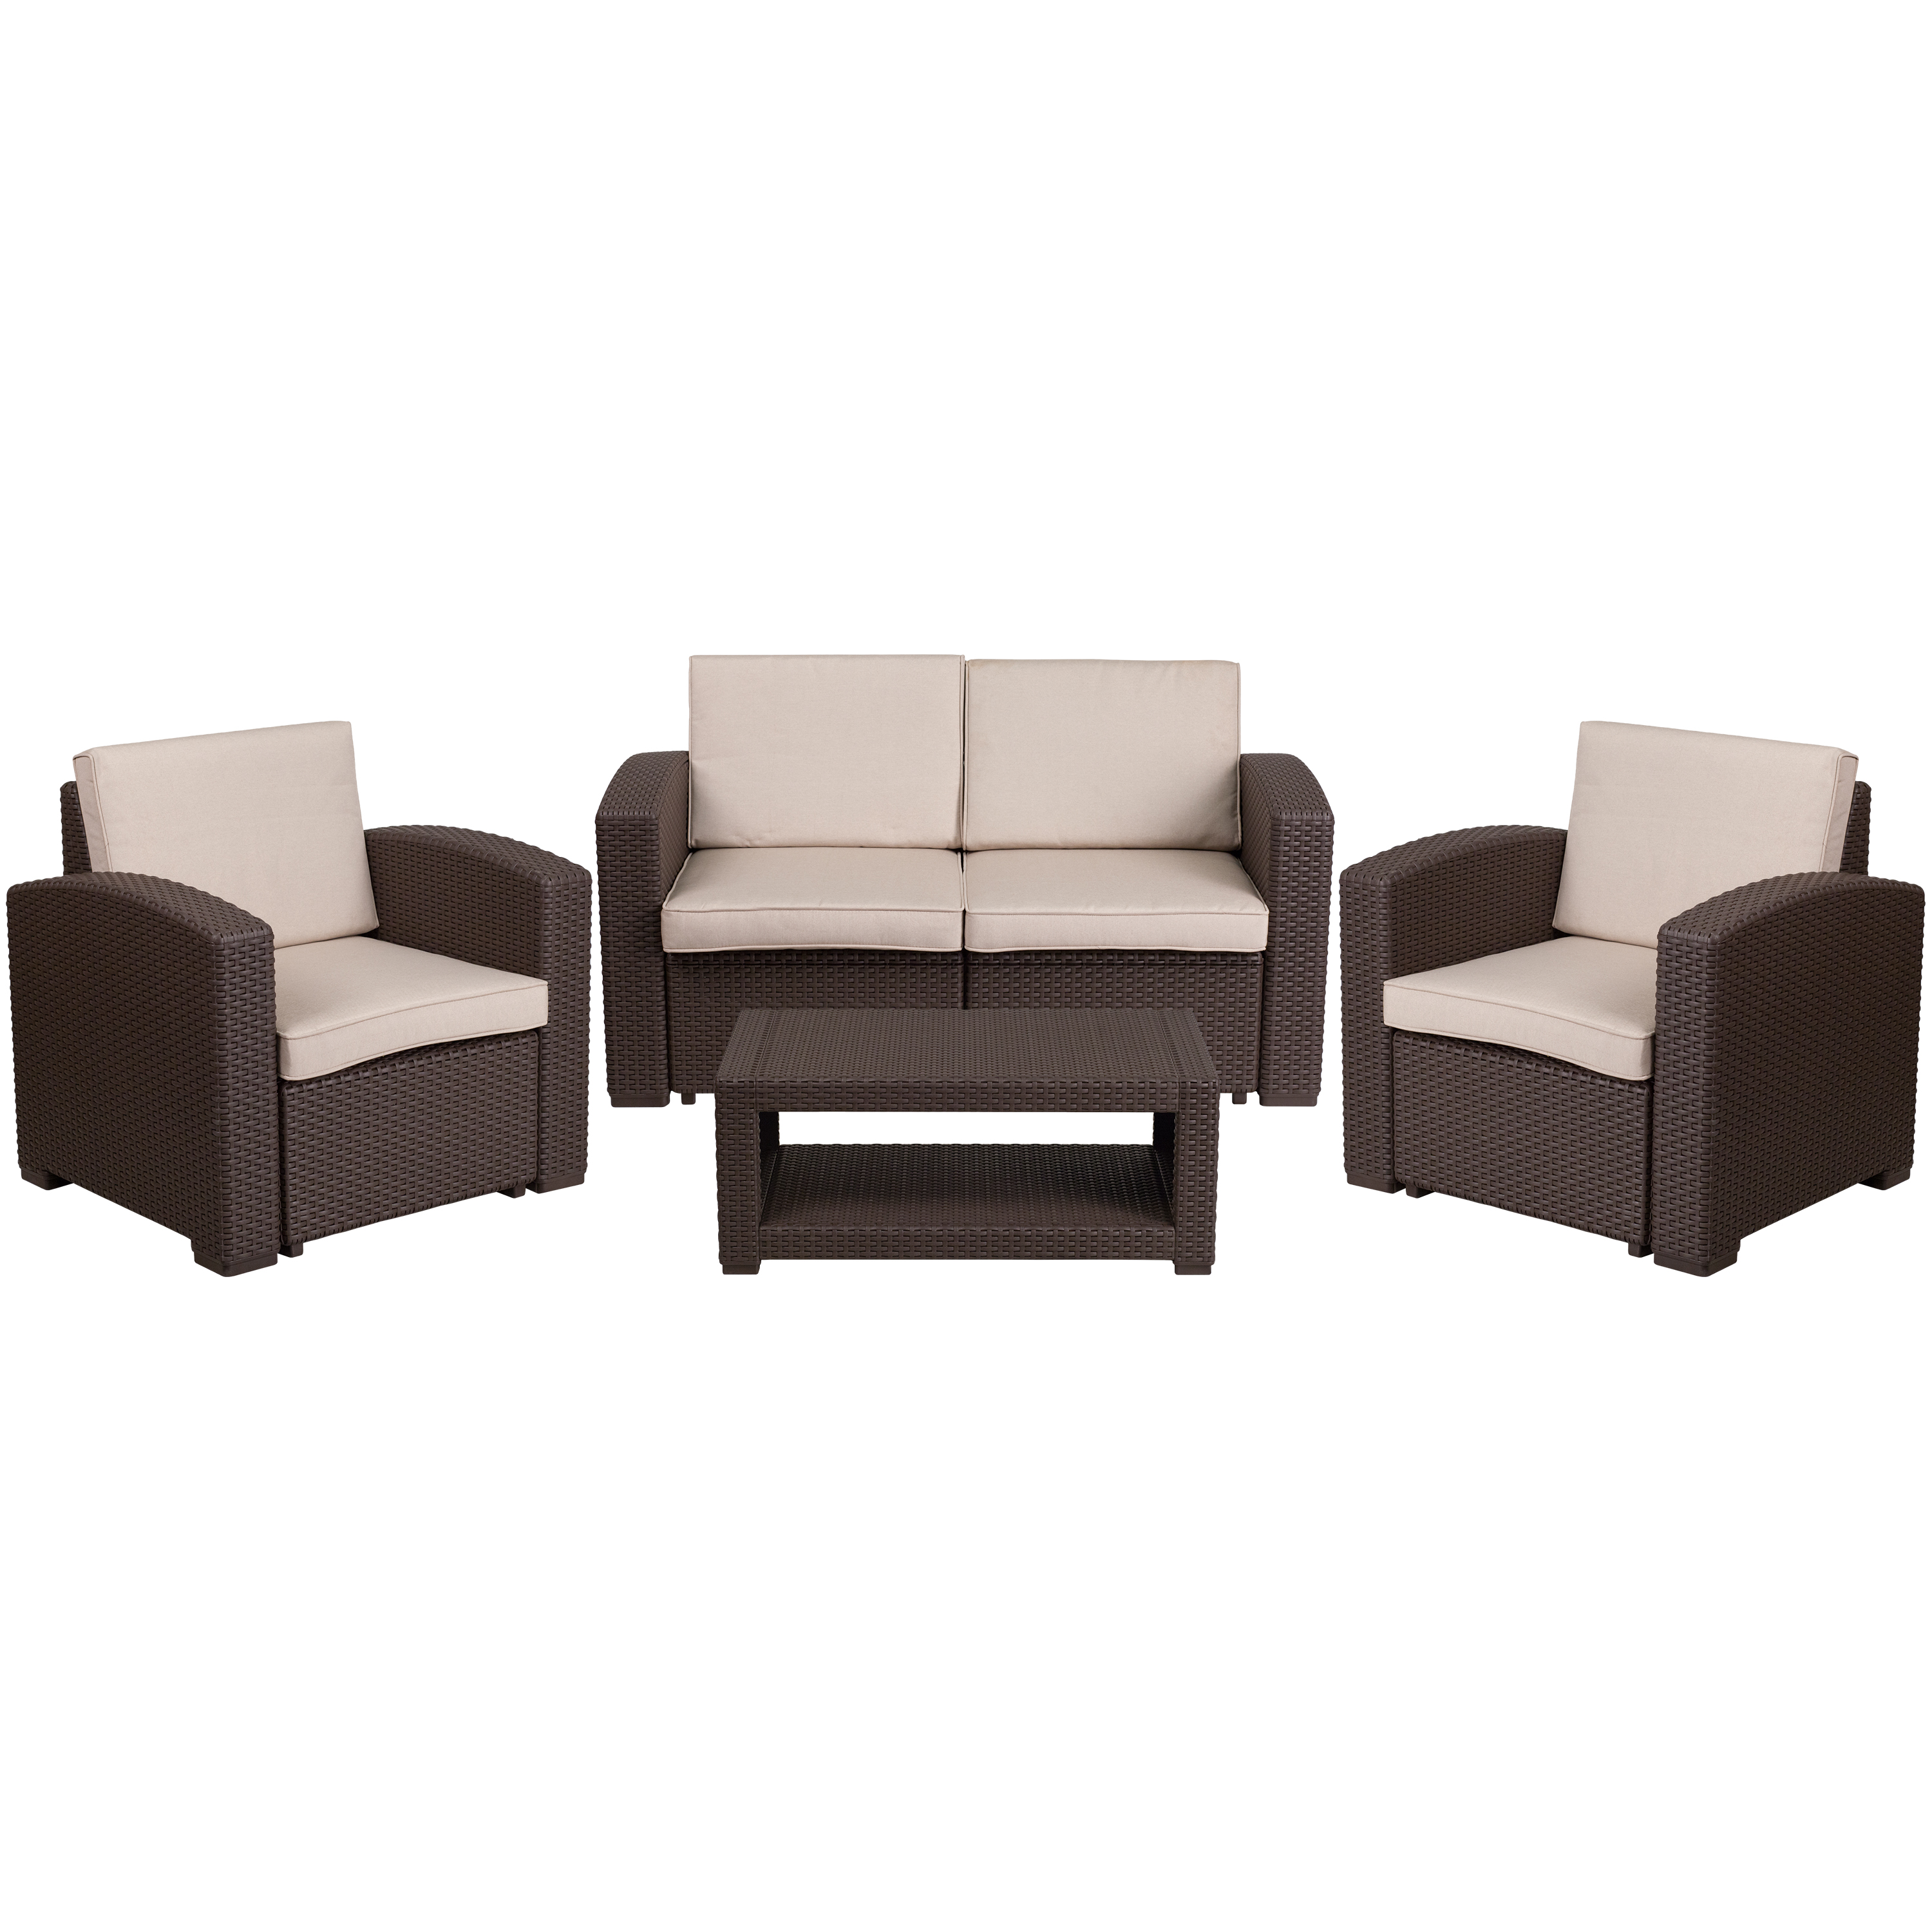 Flash Furniture Seneca 4 Piece Outdoor Faux Rattan Chair, Loveseat and Table Set in Seneca Chocolate Brown - image 1 of 5